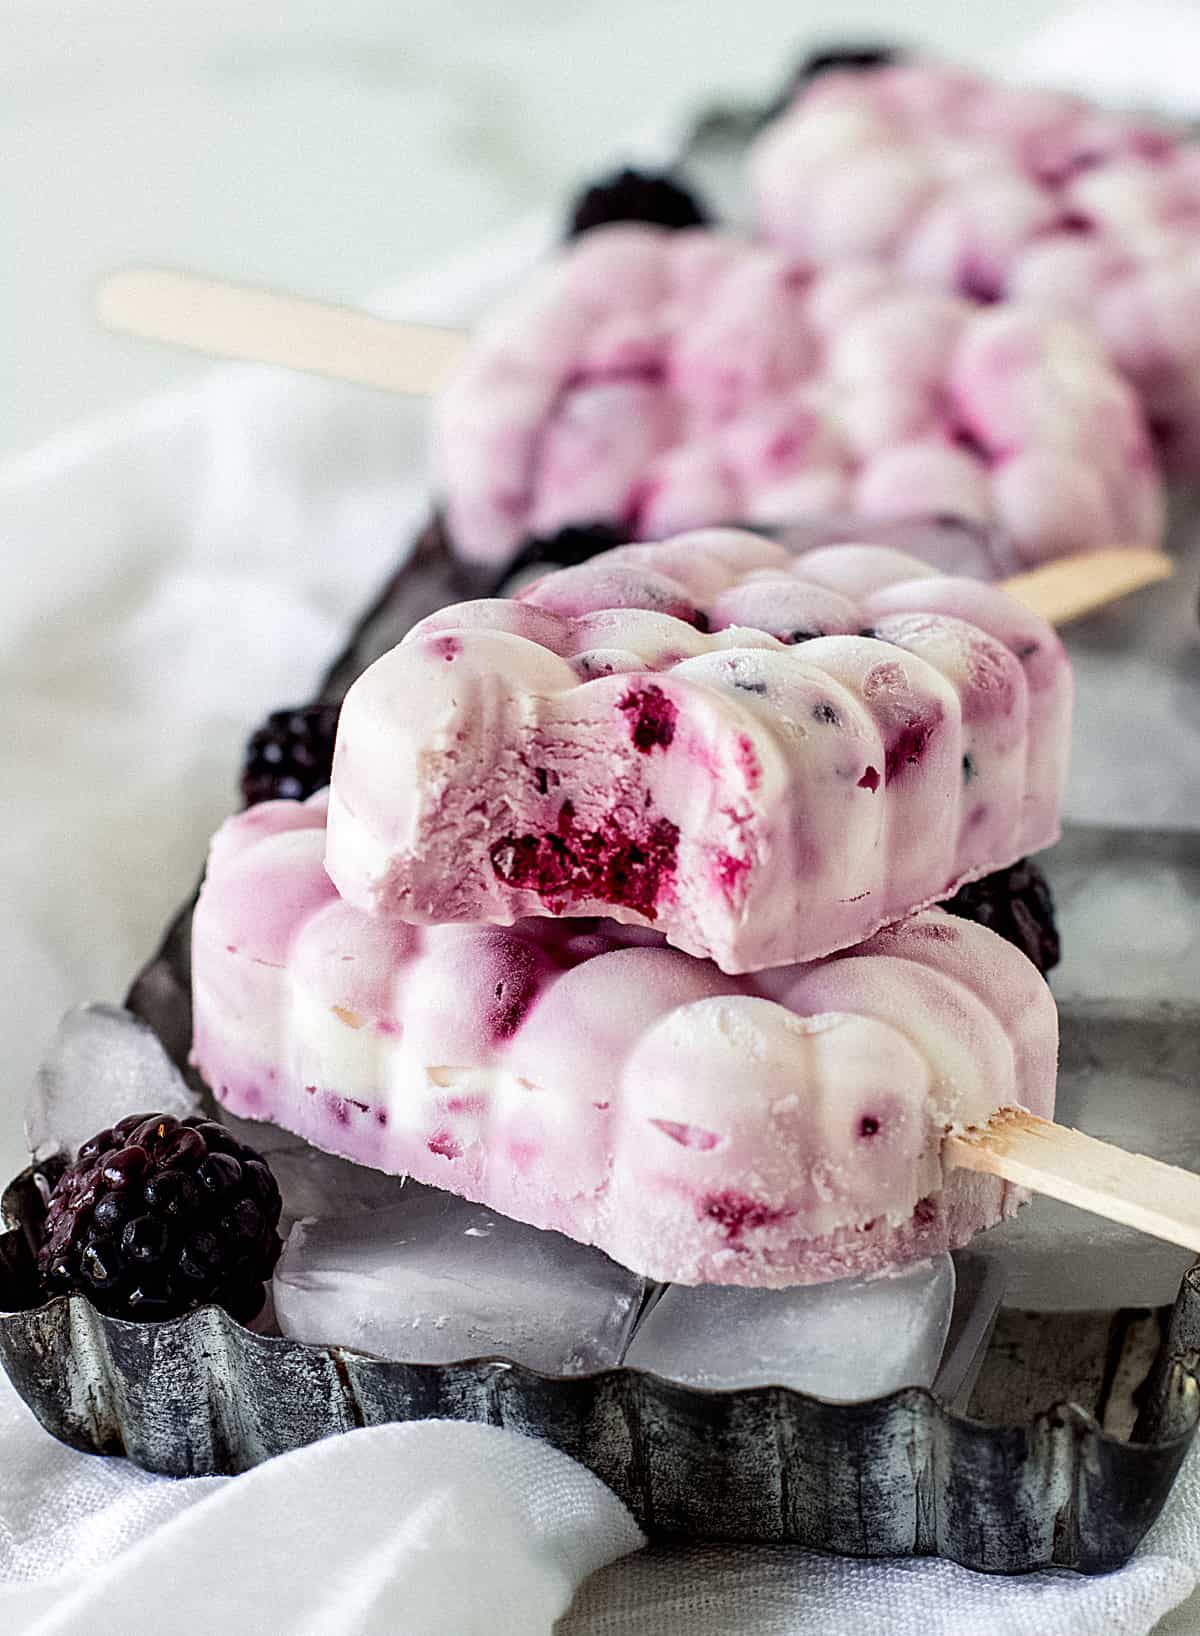 Several berry cheesecake ice cream popsicles, one bitten, on top of a rectangular metal pan